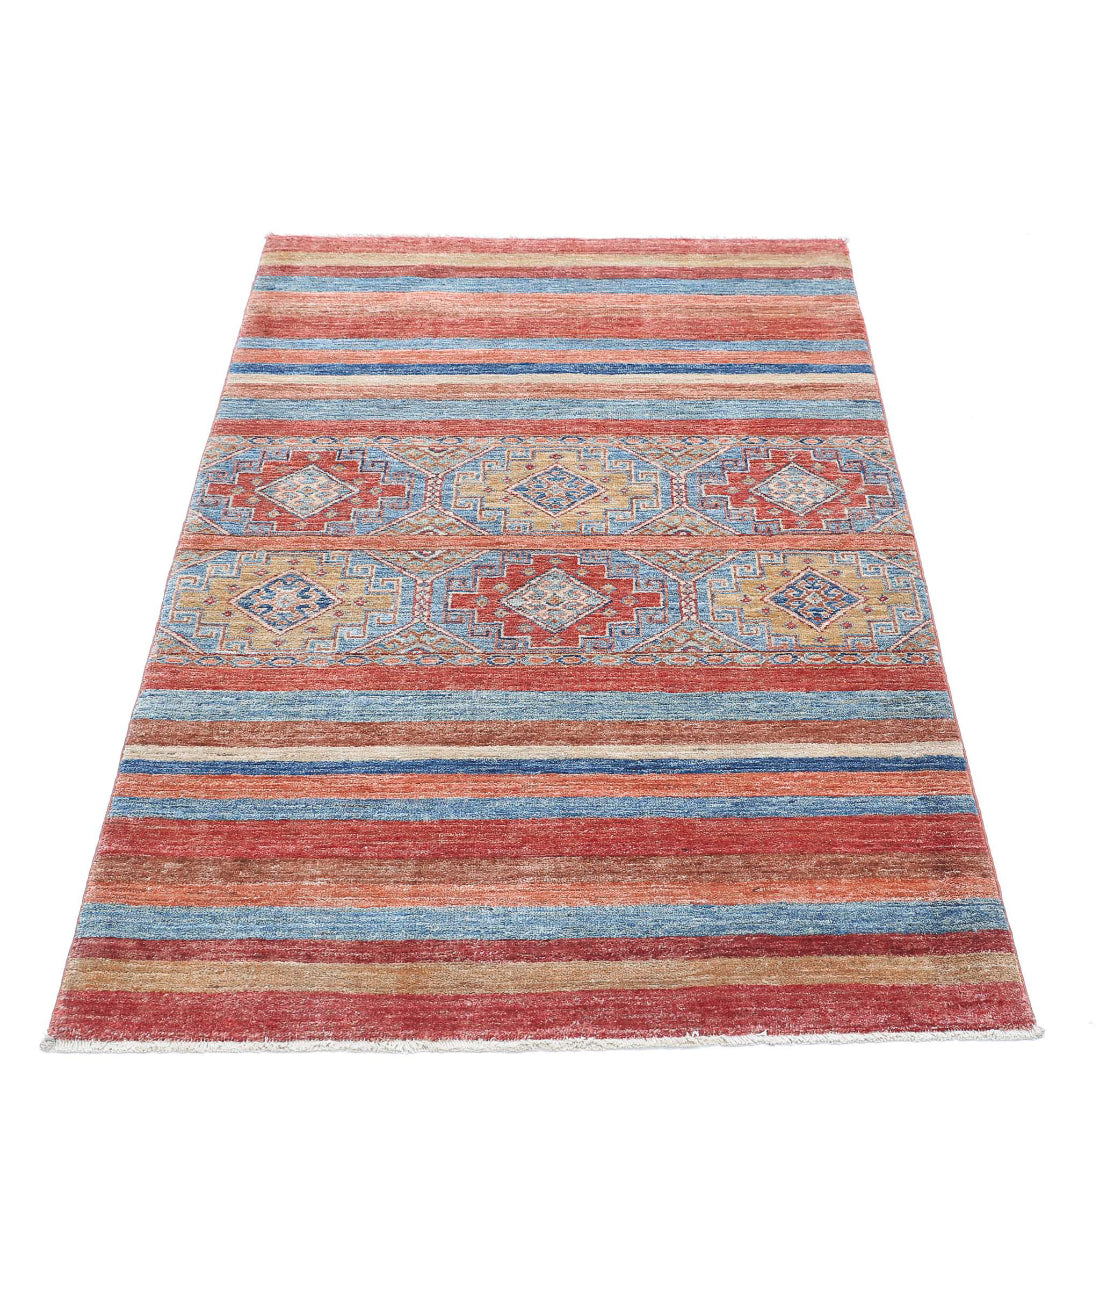 Hand Knotted Khurjeen Wool Rug - 3'0'' x 4'9'' 3'0'' x 4'9'' (90 X 143) / Multi / Multi